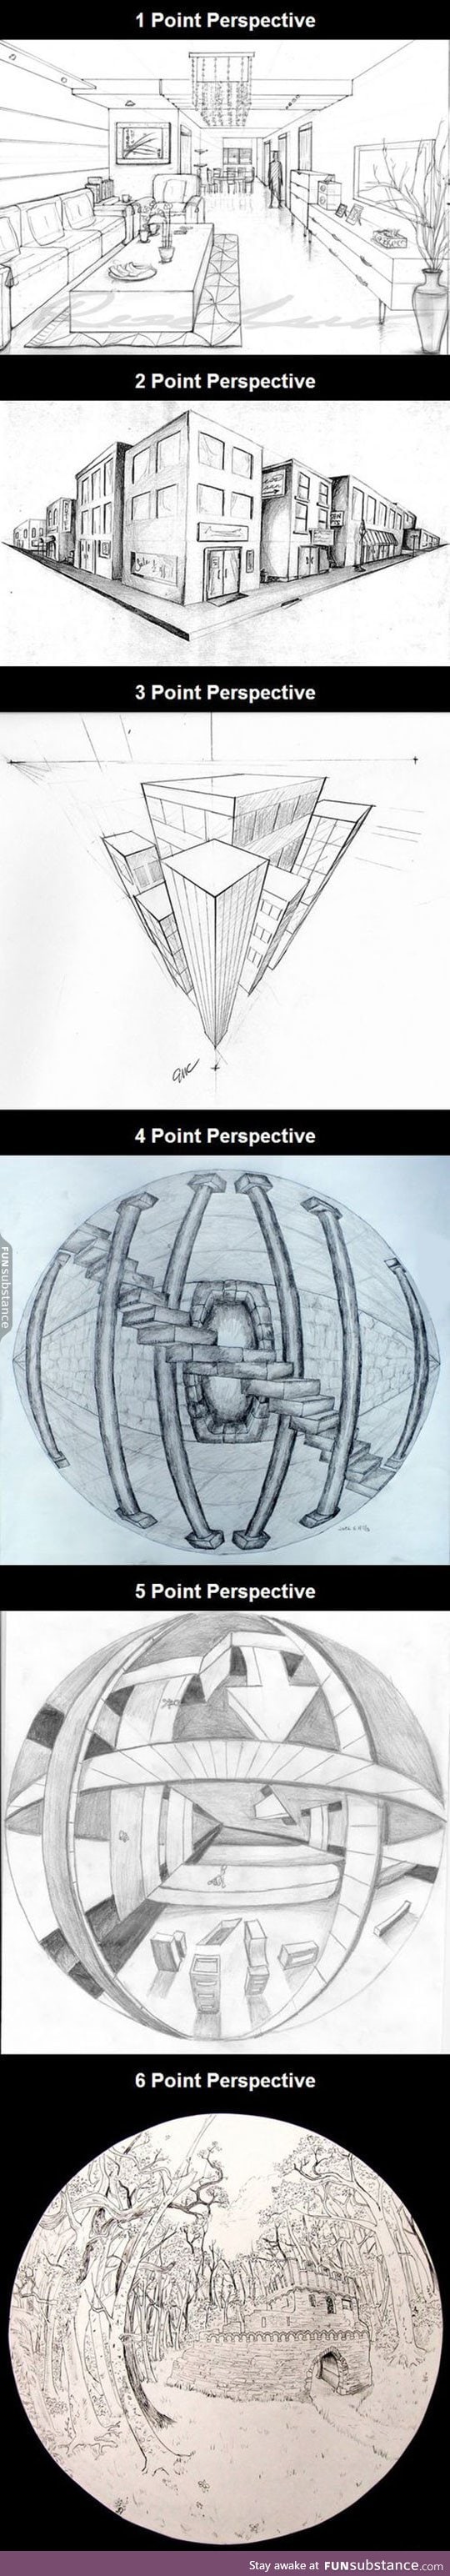 Perspective points